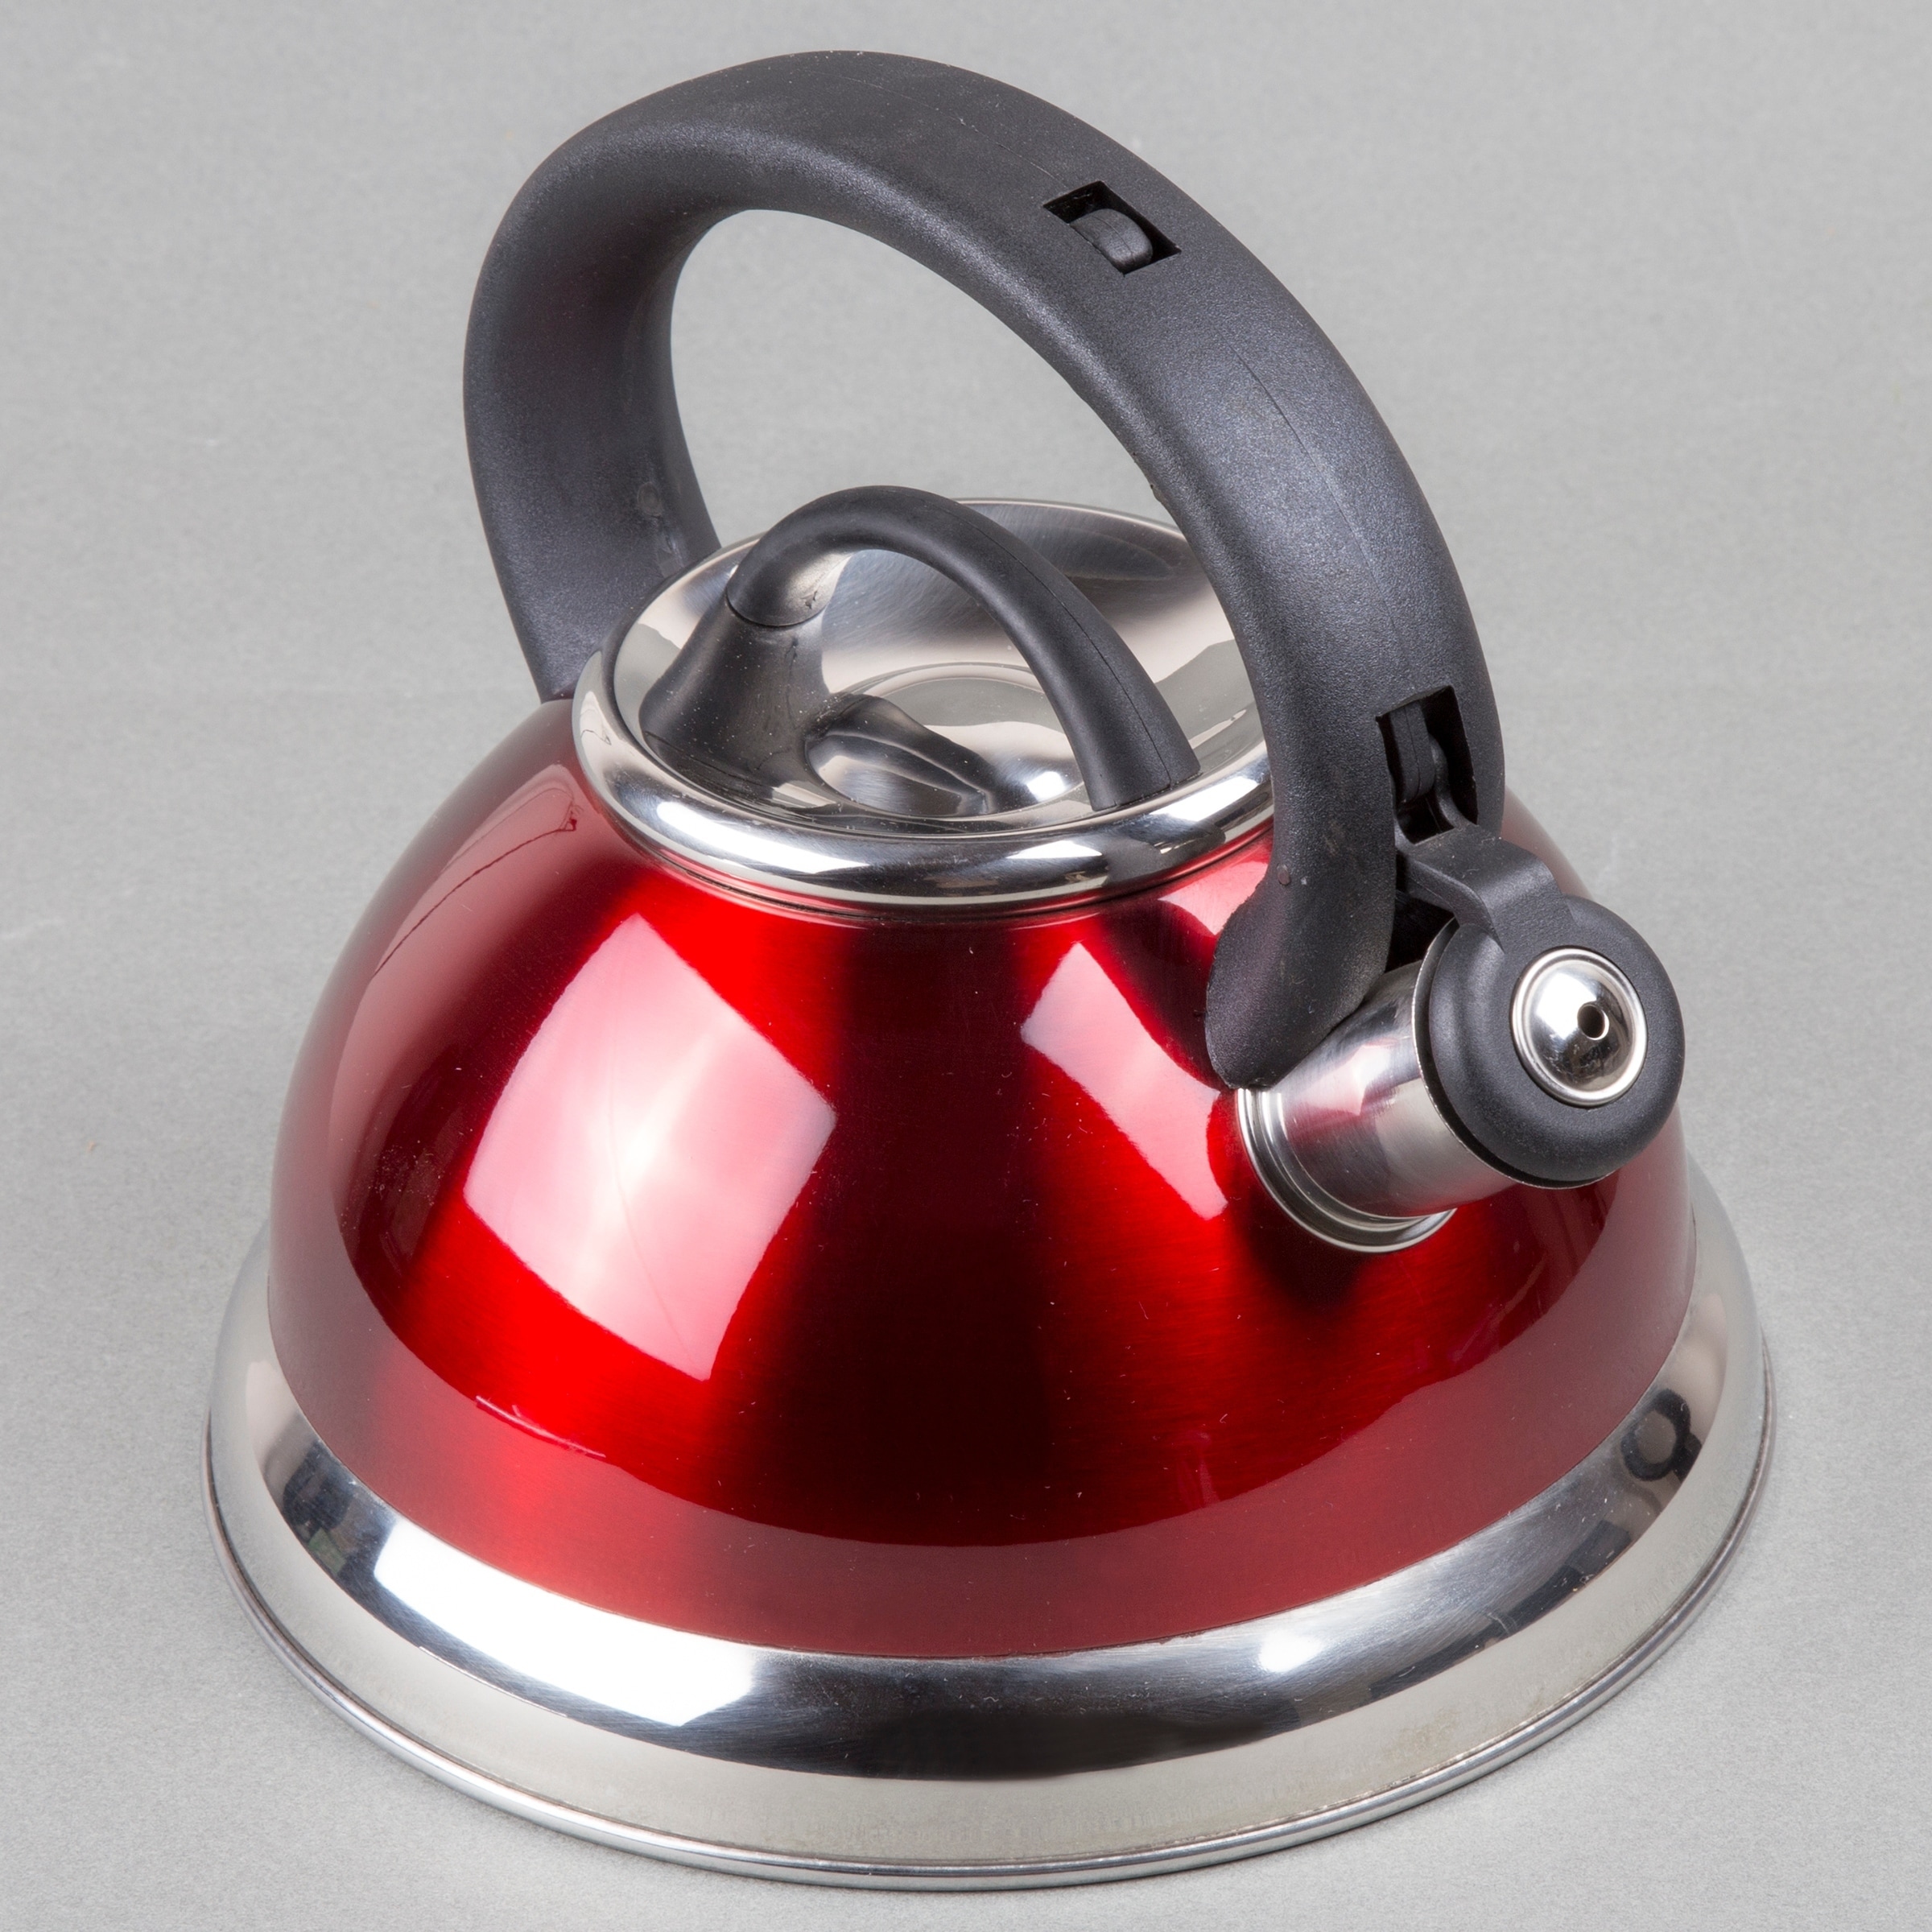 Creative Home Alexa 3.0 Quart Stainless Steel Whistling Tea Kettle with  Aluminum Capsulated Bottom, Metallic Cranberry Color - On Sale - Bed Bath &  Beyond - 10669180